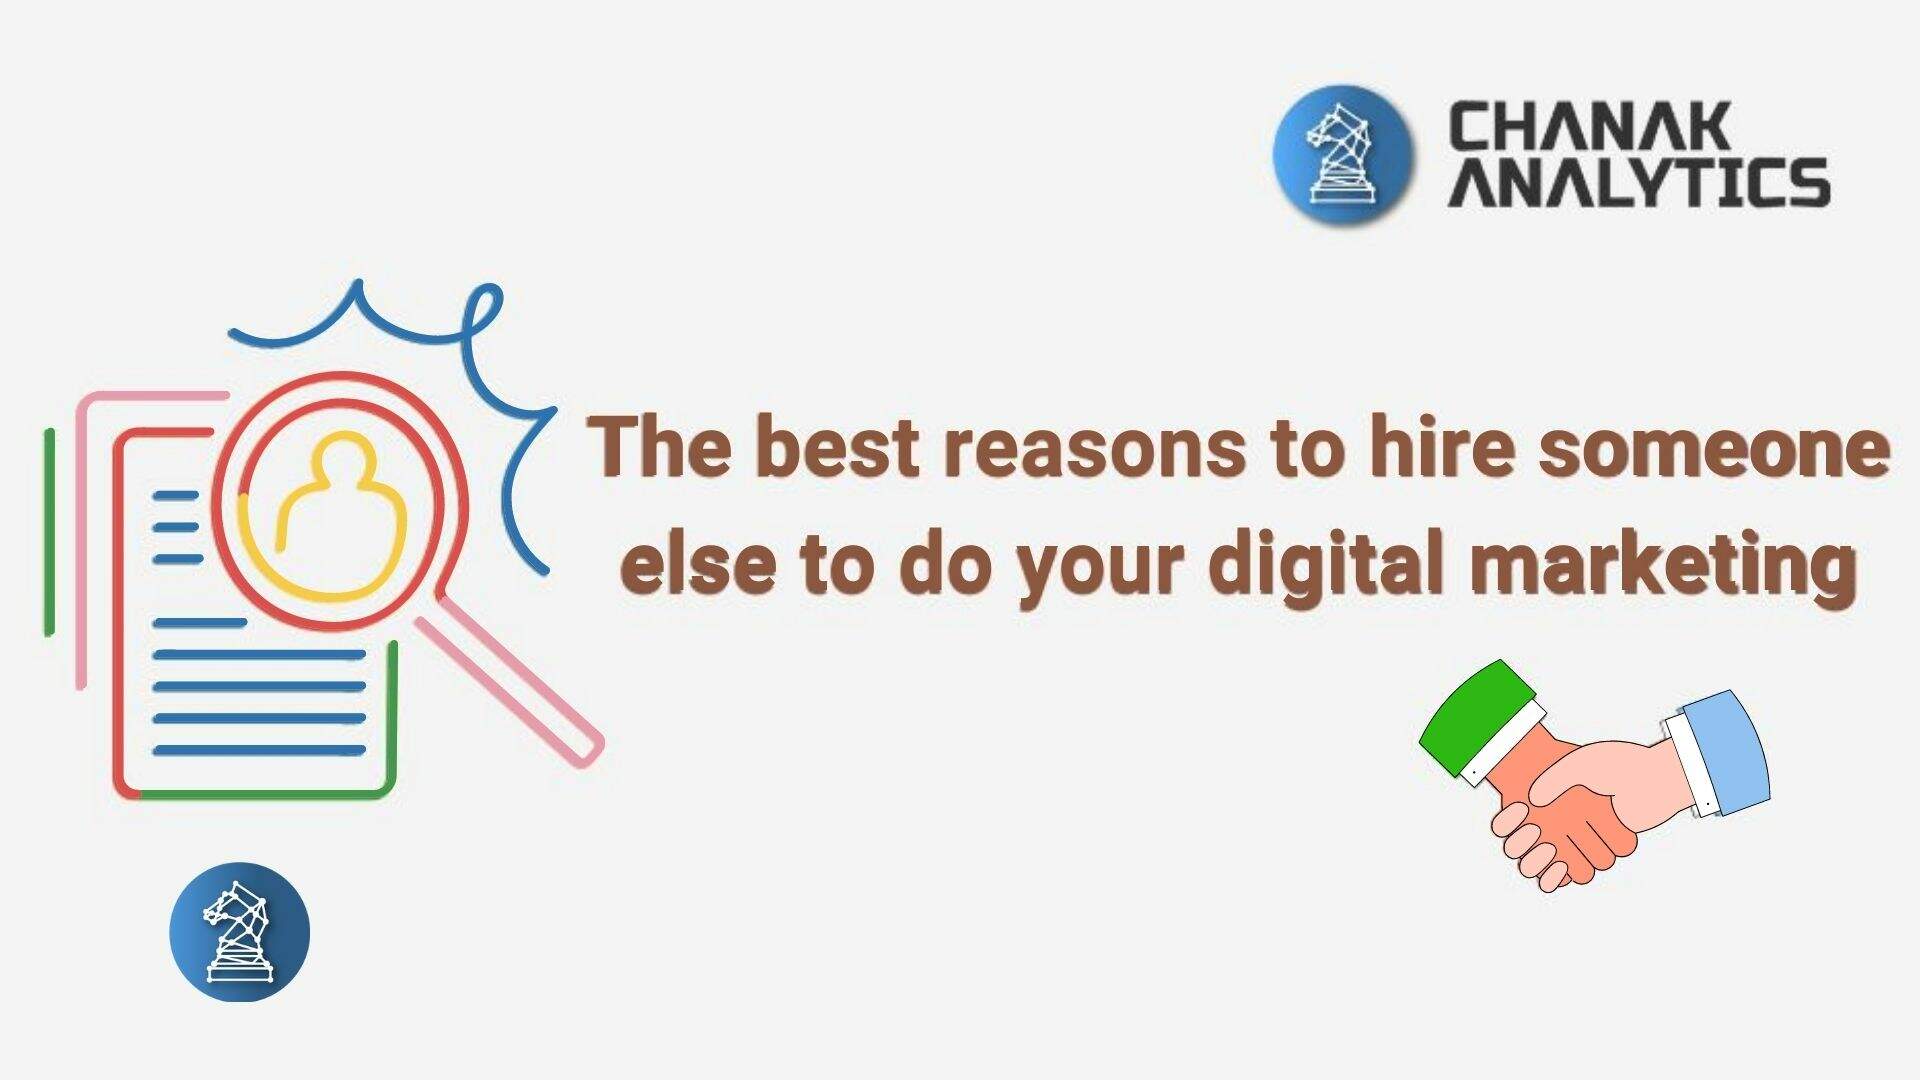 Digital marketing outsourcing hire